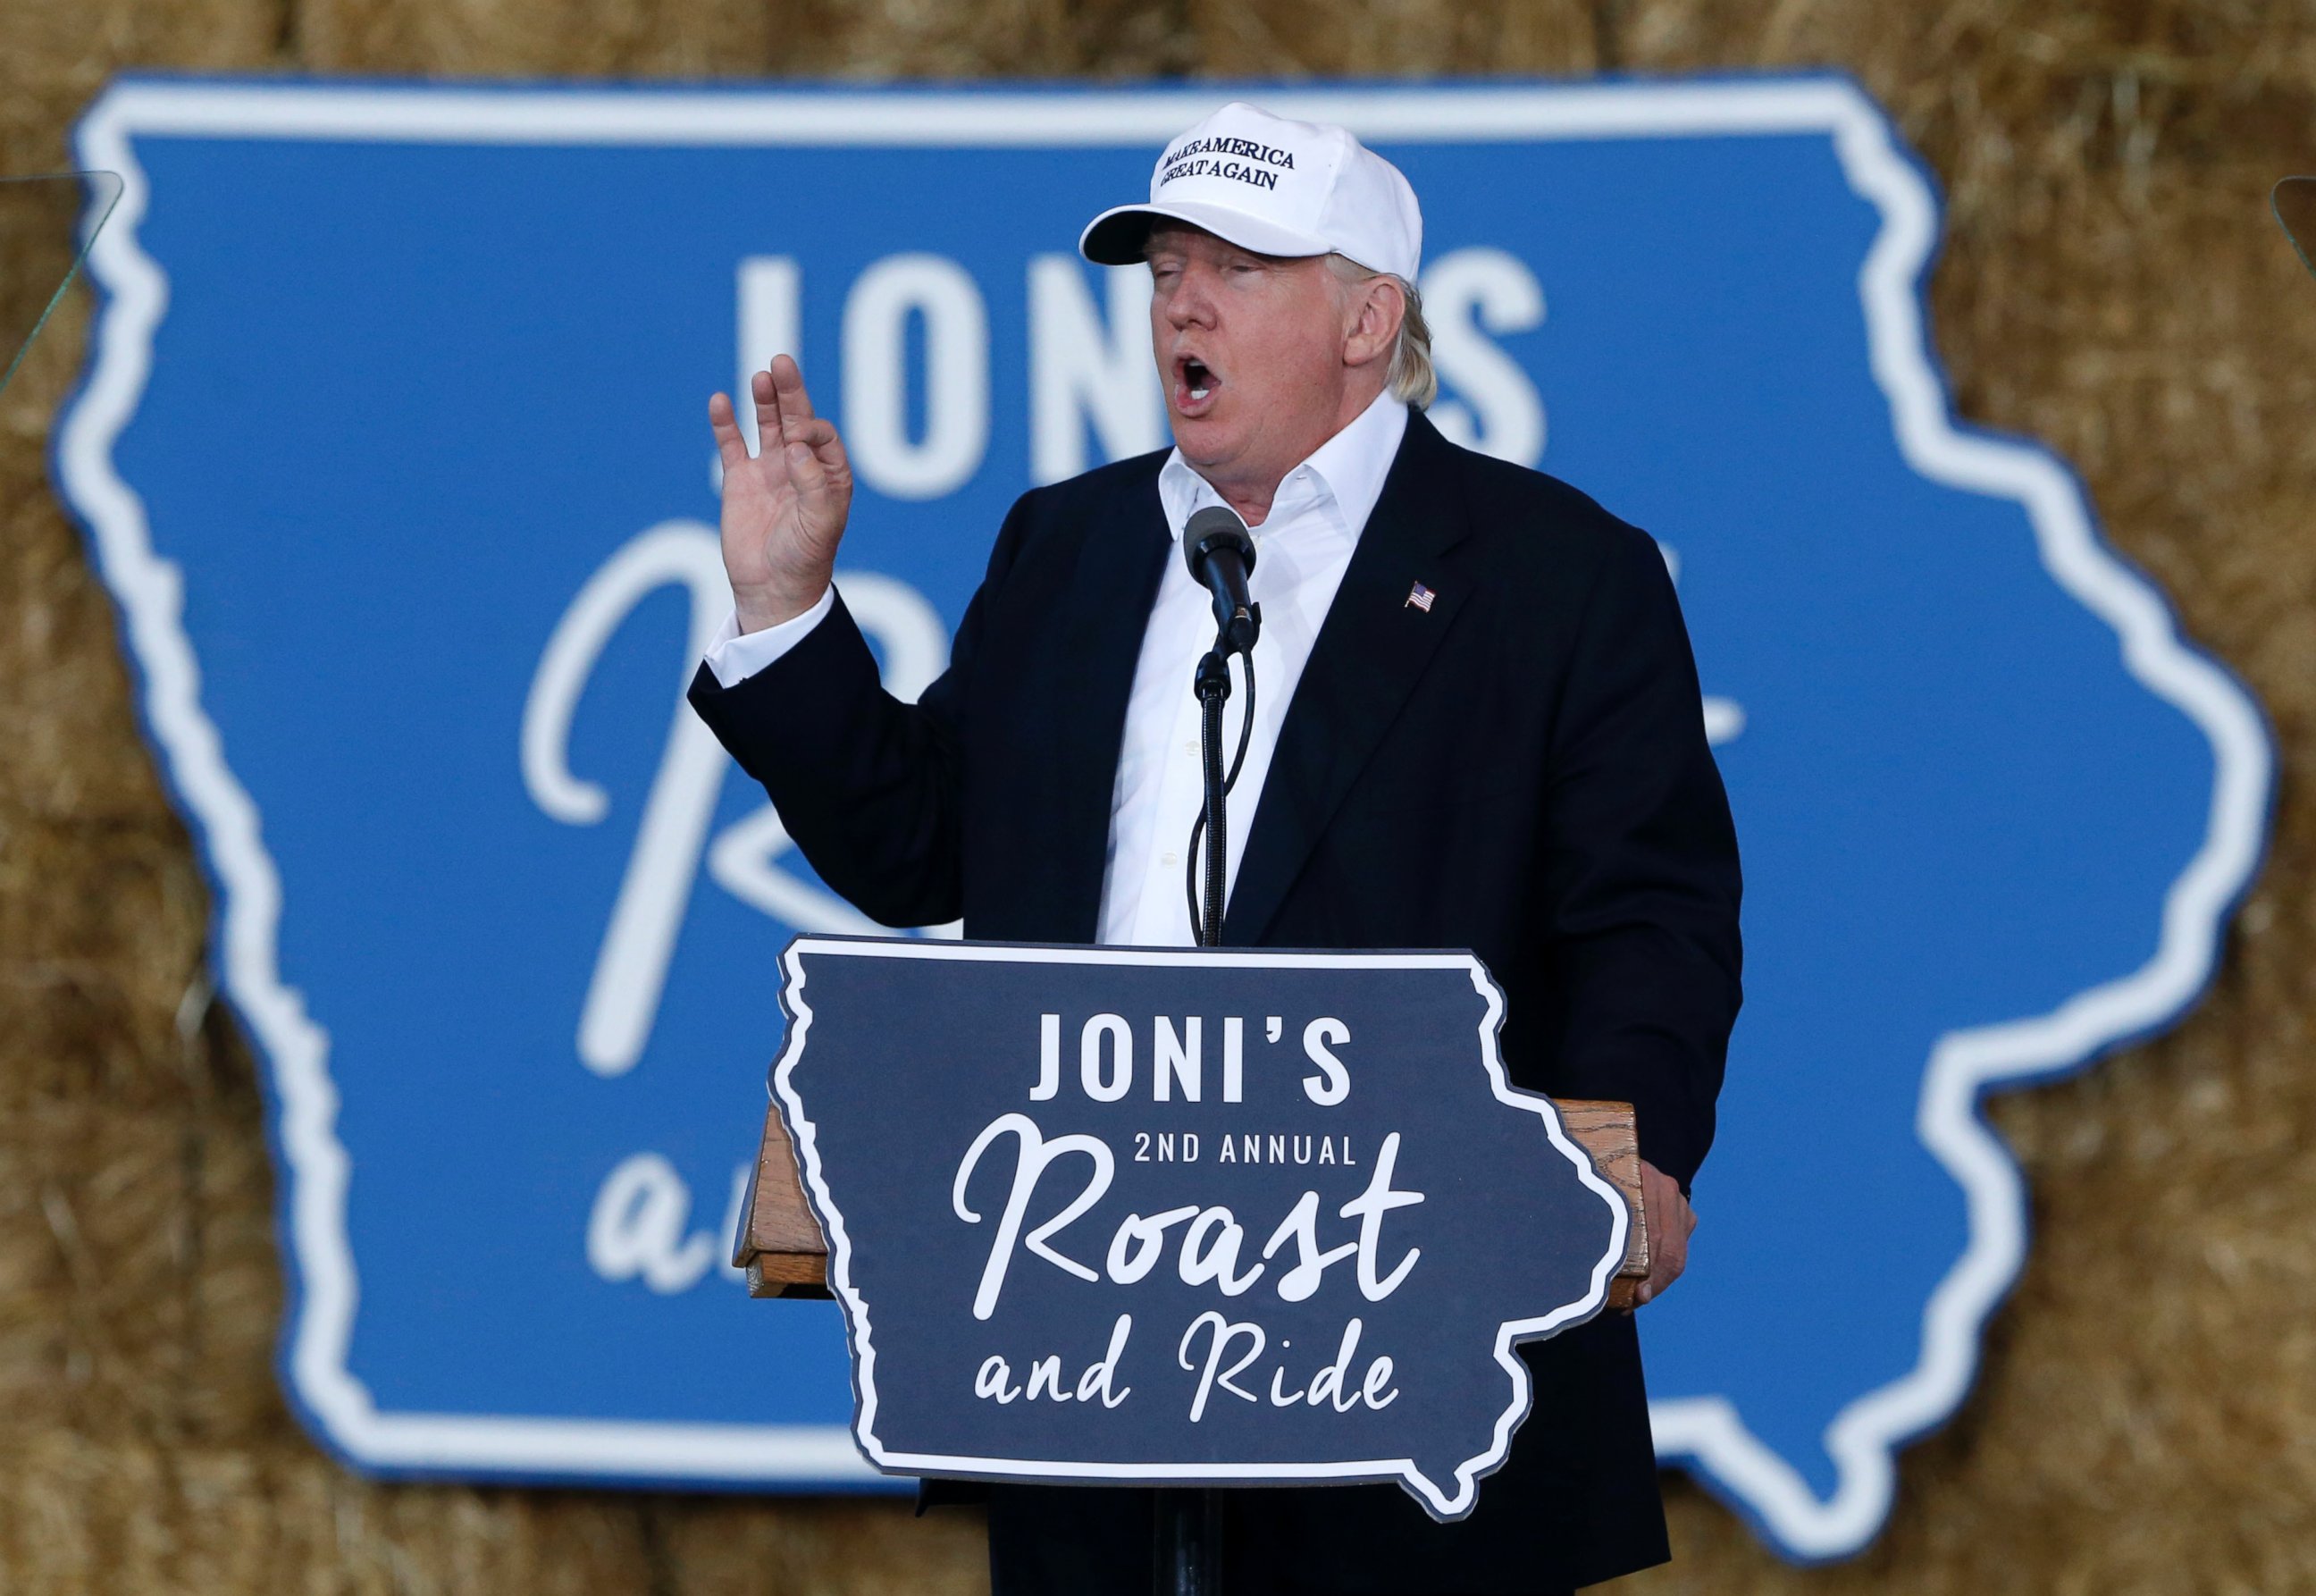 PHOTO: Donald Trump speaks at Joni's Roast and Ride at the Iowa State Fairgrounds, in Des Moines, Iowa, Aug. 27, 2016.